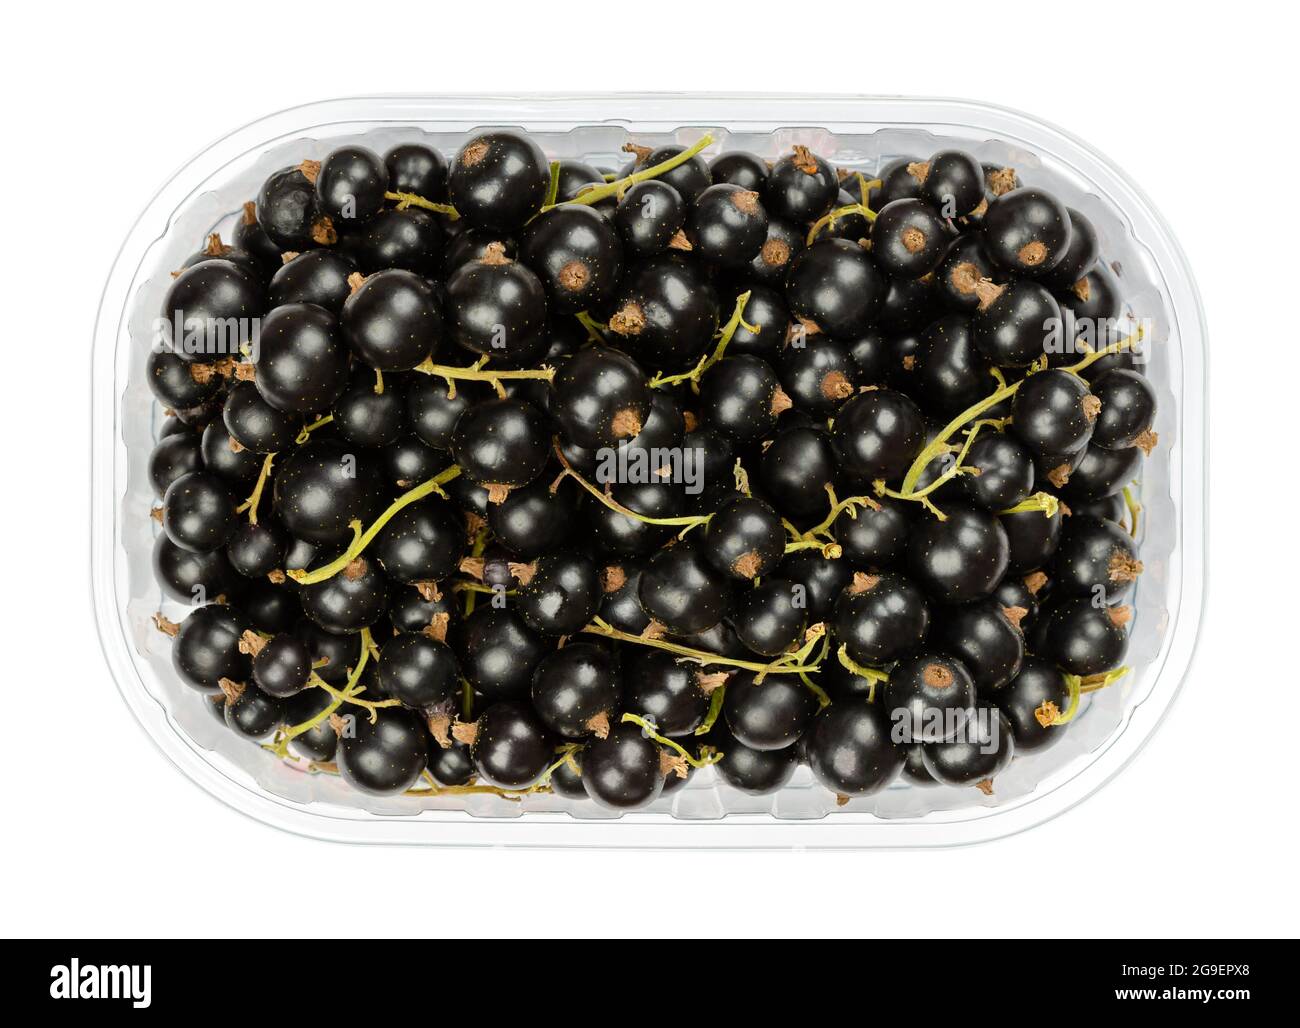 Blackcurrant berries, in a plastic container. Fresh ripe black currant berries, known as cassis, spherical edible fruits of Ribes nigrum. Stock Photo